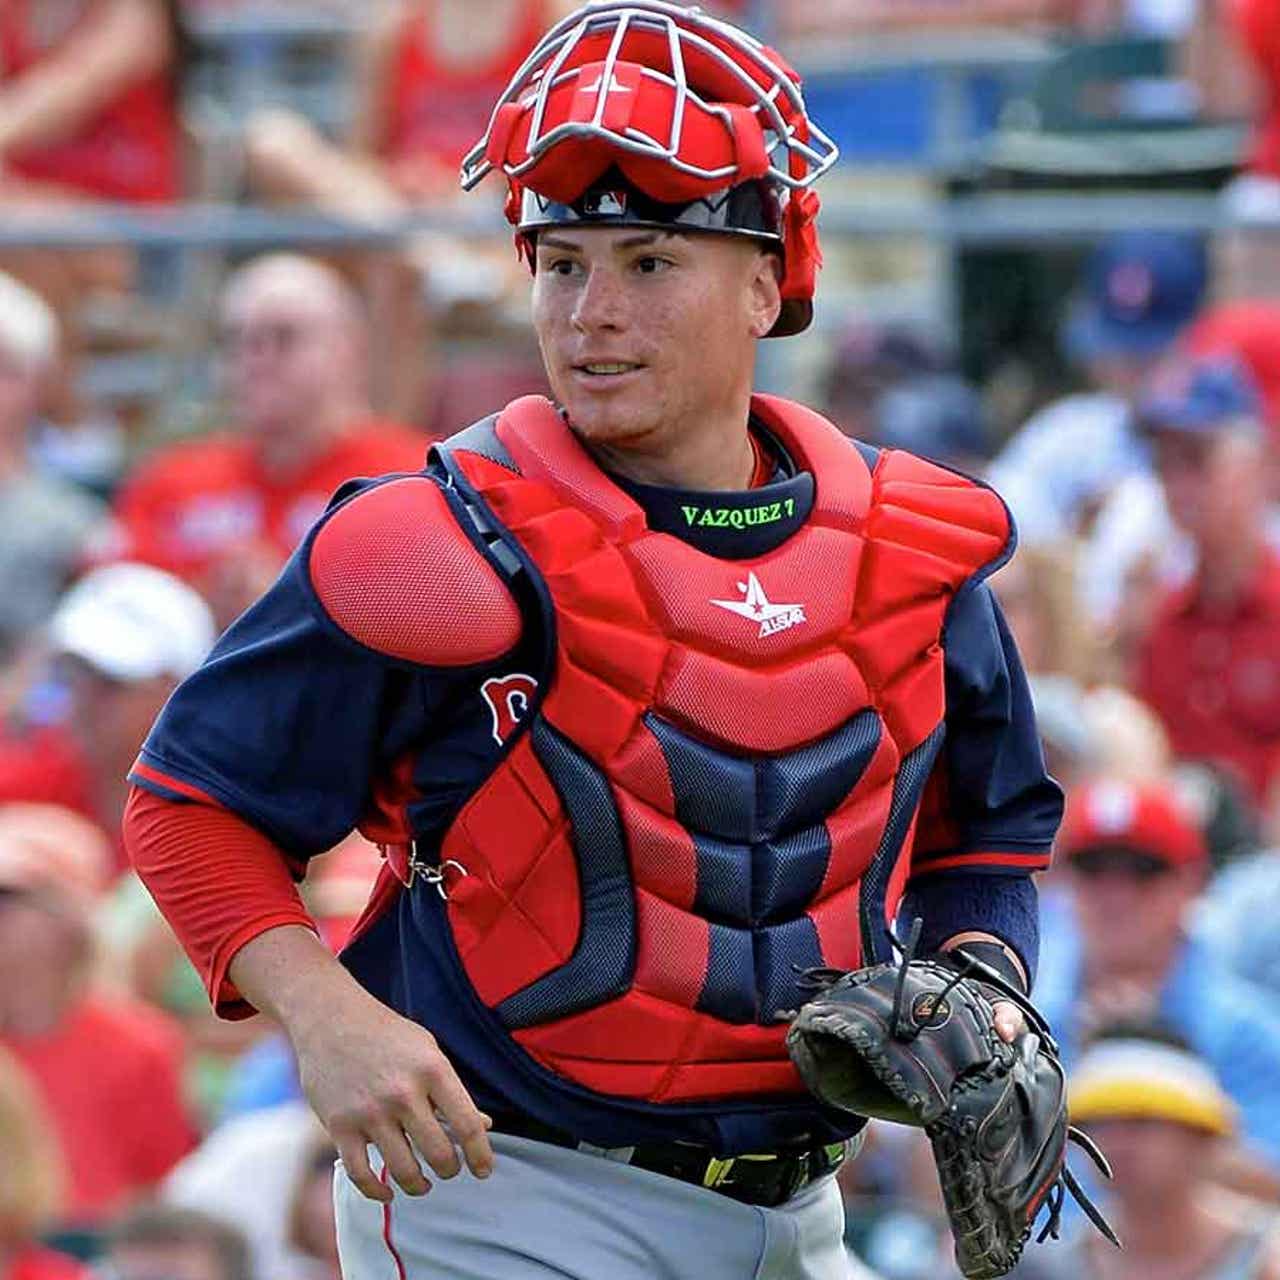 Red Sox catcher Vazquez says he will have Tommy John surgery